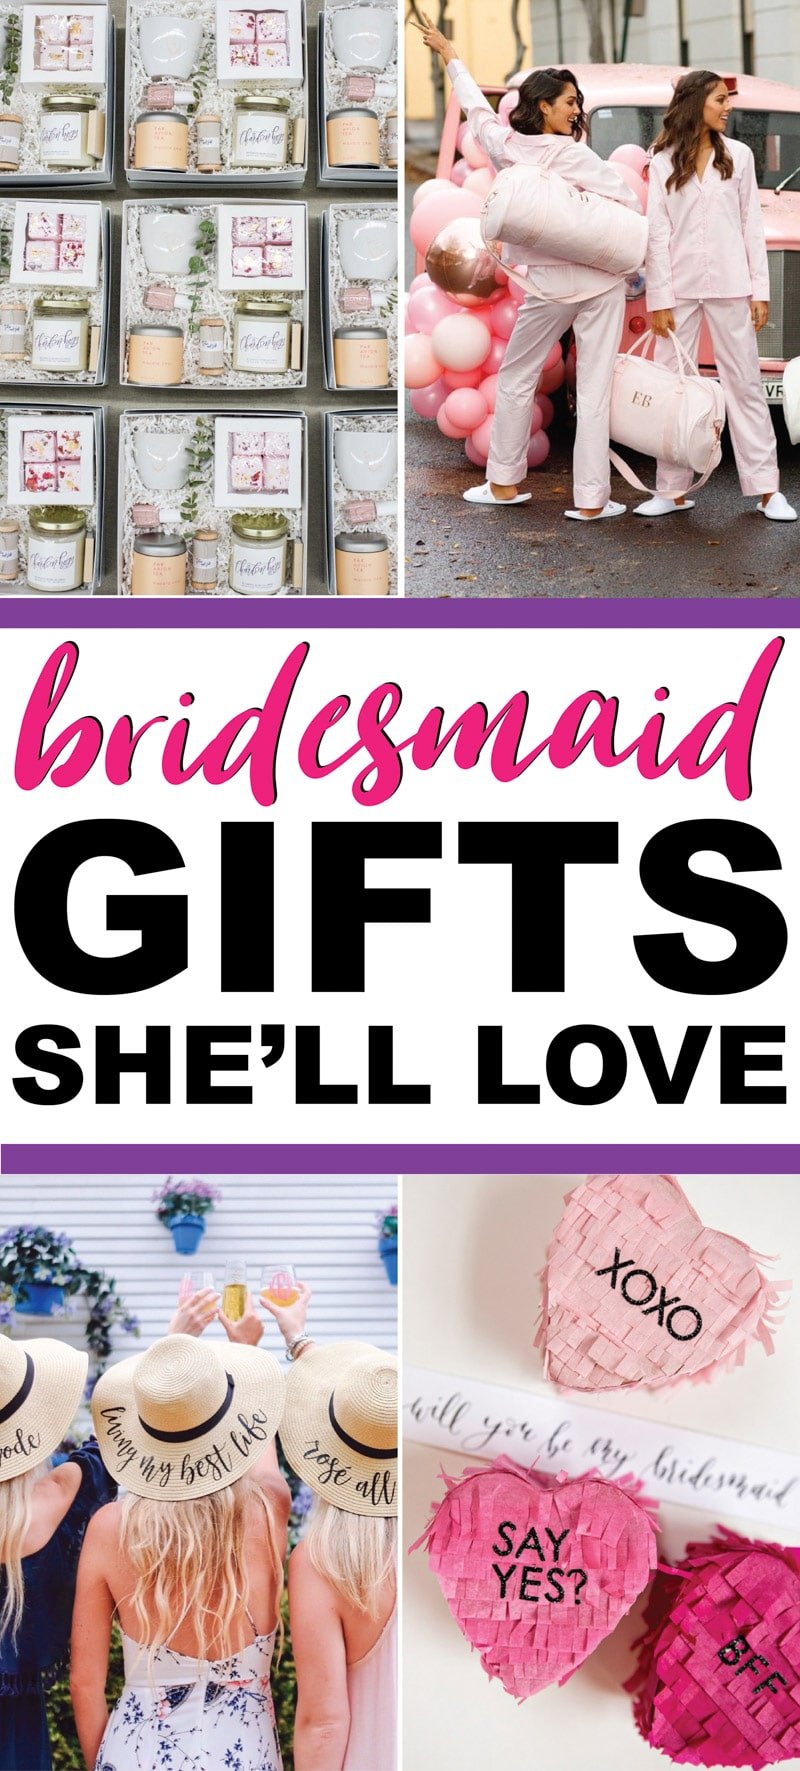 The best bridesmaid gifts from bride and gifts to ask will you be my bridesmaid. Everything from DIY gif ideas to unique ones that are both cheap and useful! Perfect for anyone looking for something personalized and inexpensive but still sentimental! 